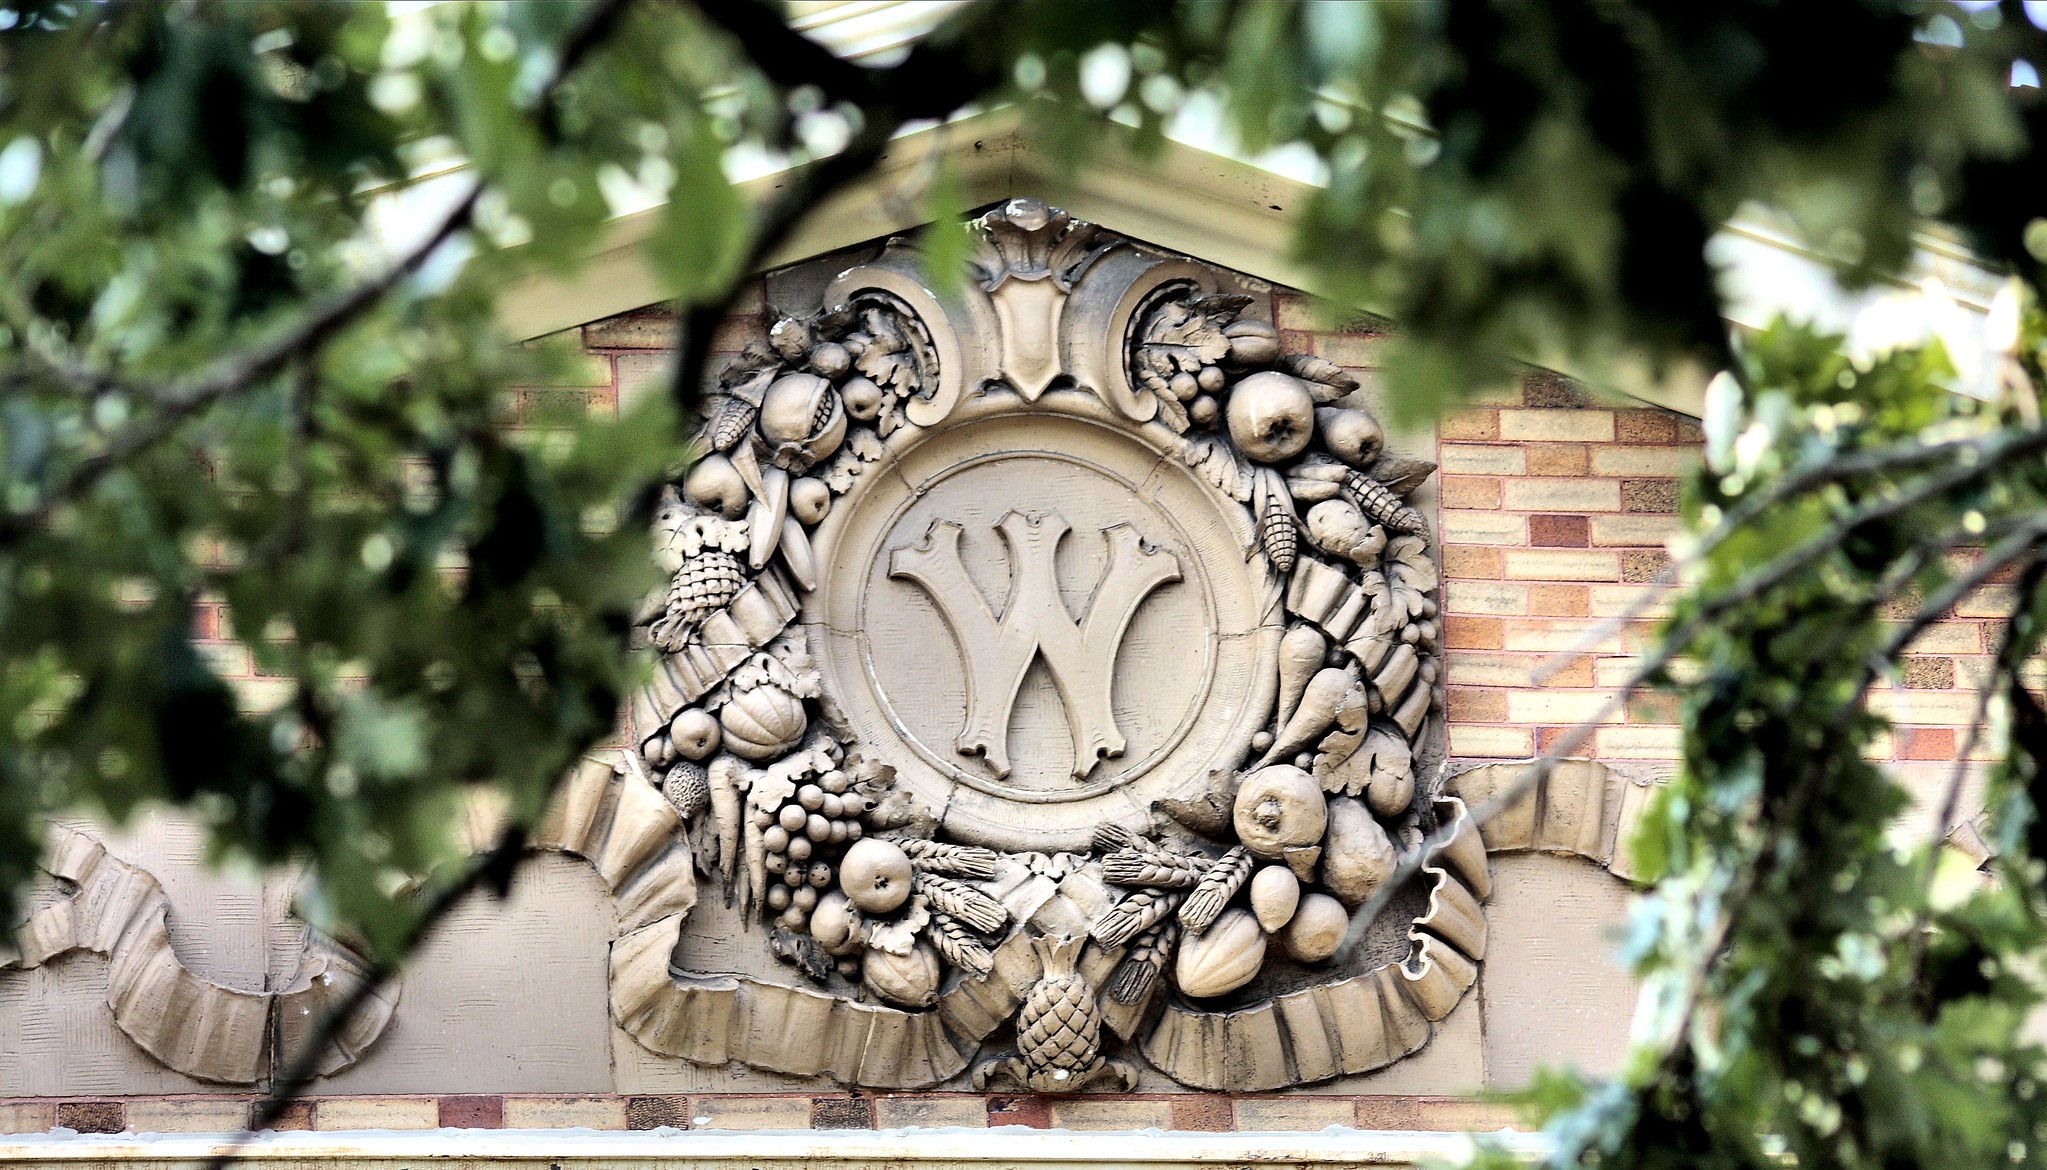 An old UW-Madison "W" insignia on Agricultural Hall